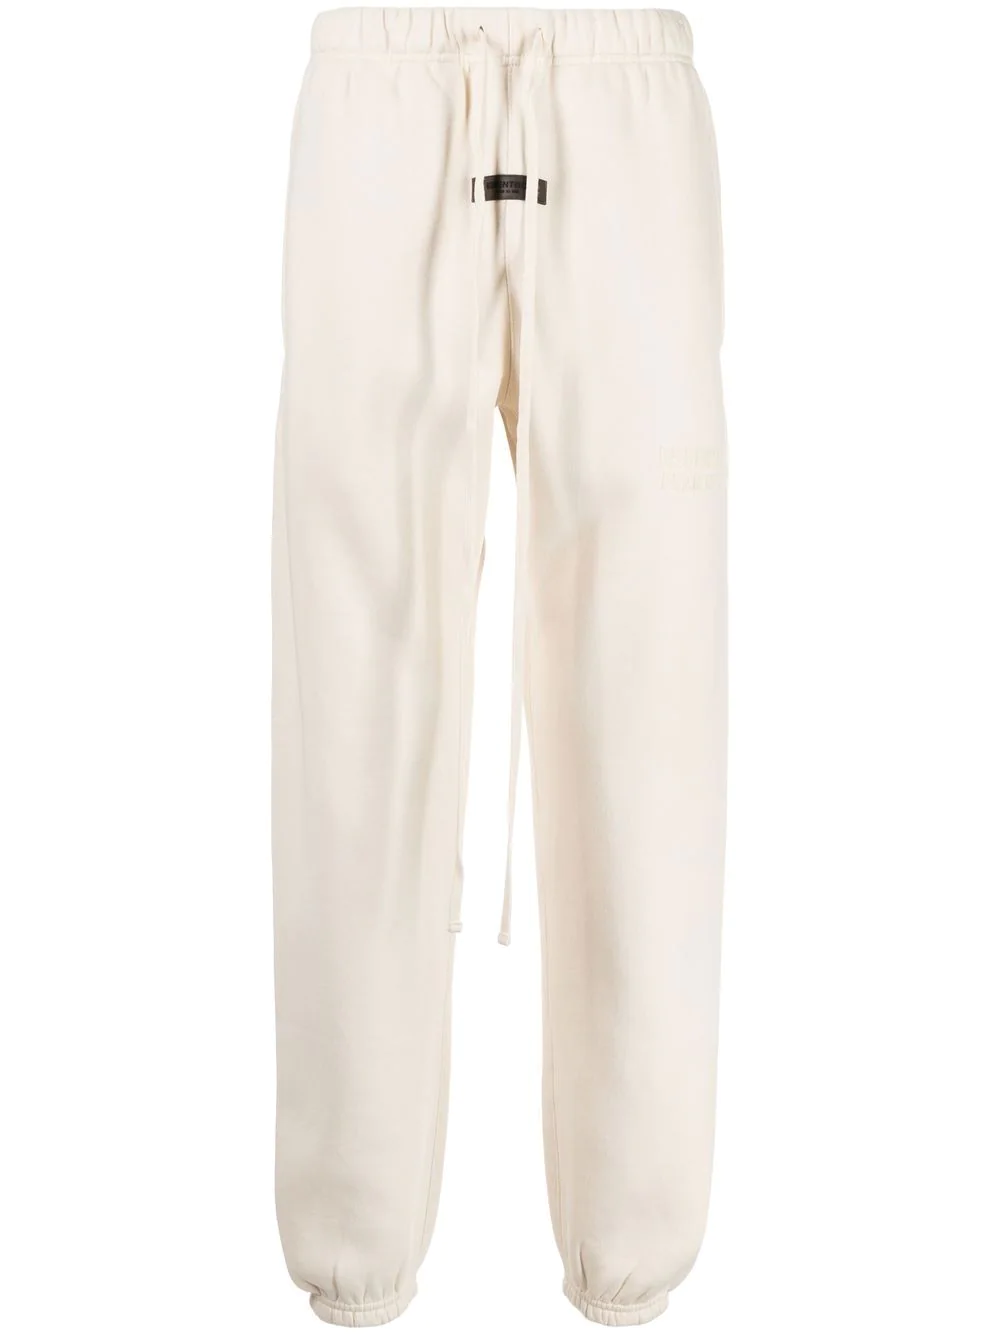 Fear of God Essentials Sweatpant Egg Shell THE GARDEN